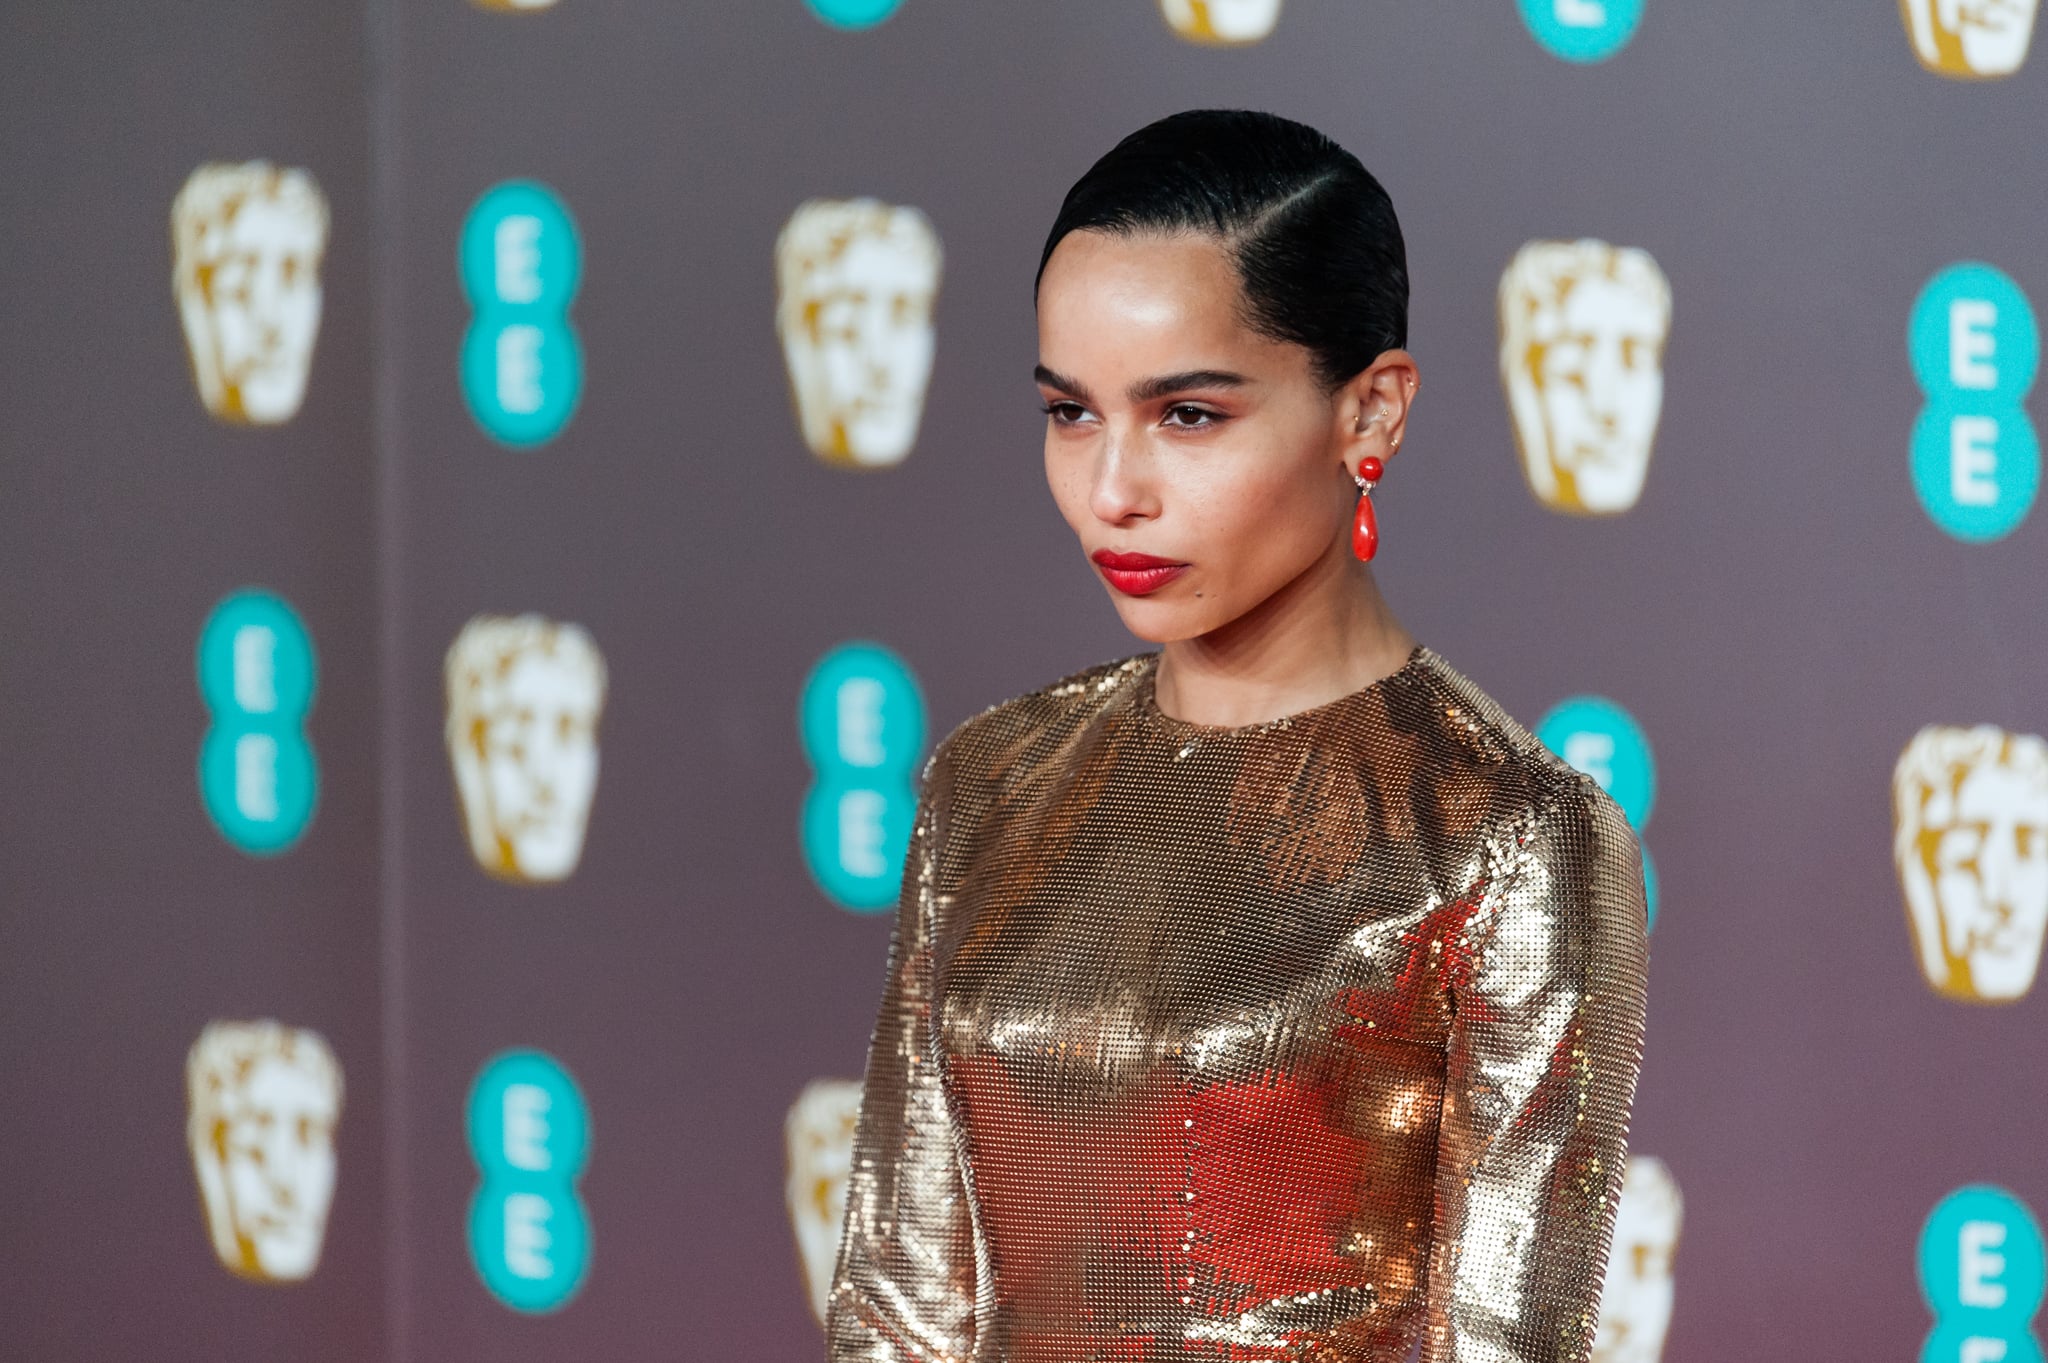 Zoe Kravitz attends the EE British Academy Film Awards ceremony at the Royal Albert Hall on 02 February, 2020 in London, England. (Photo by WIktor Szymanowicz/NurPhoto via Getty Images)